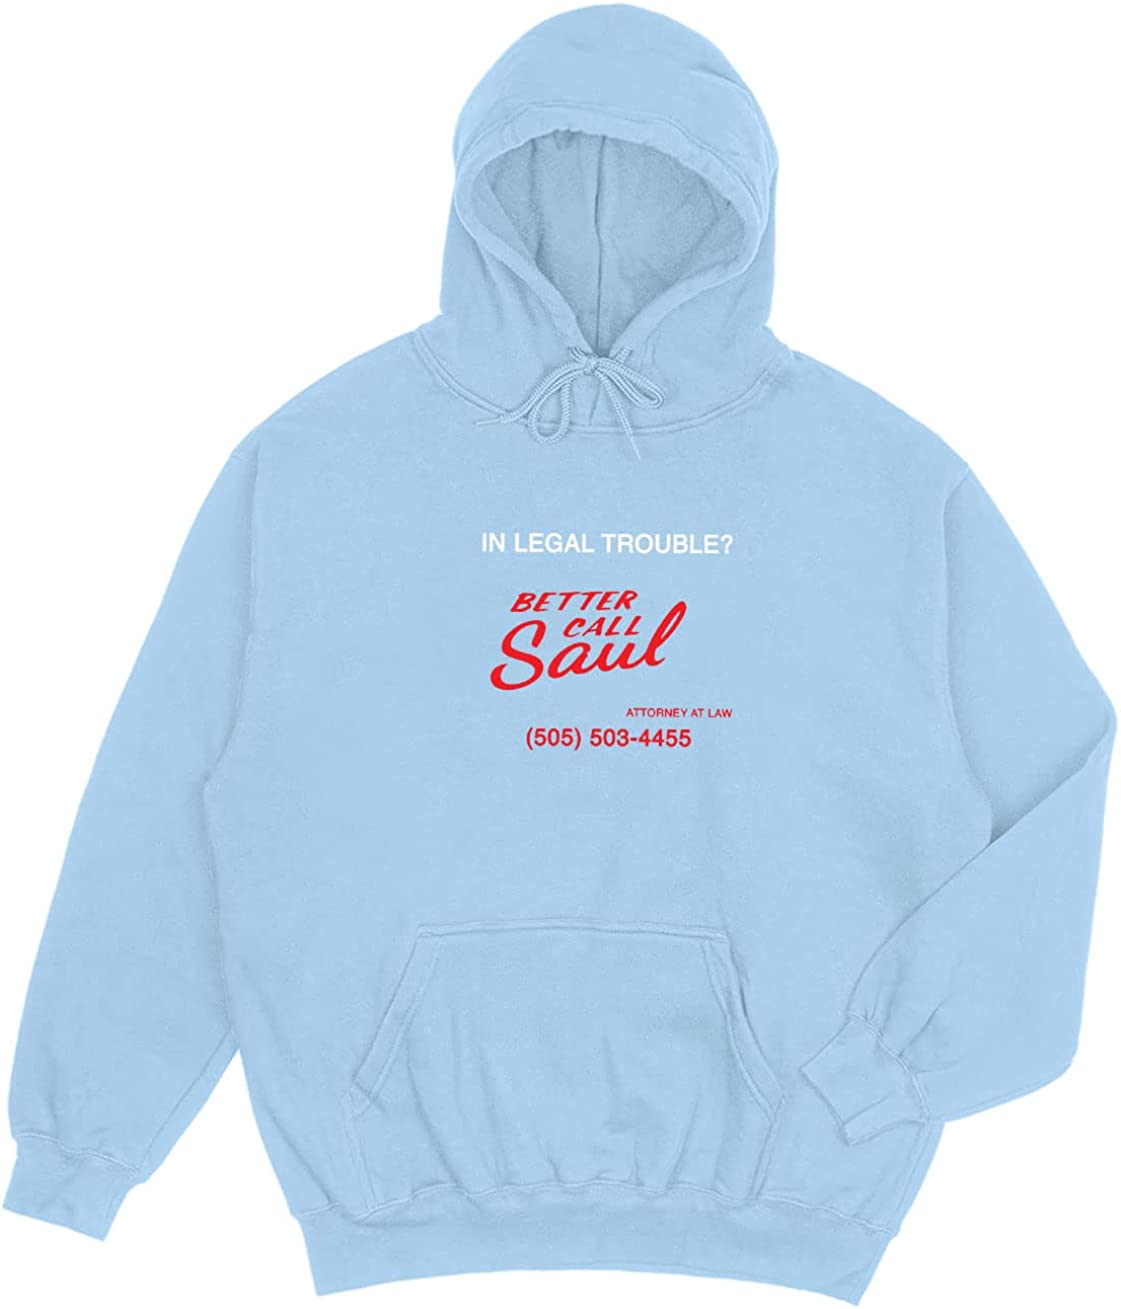 Immerse Yourself in the World of Better Call Saul: Explore Exclusive Merchandise